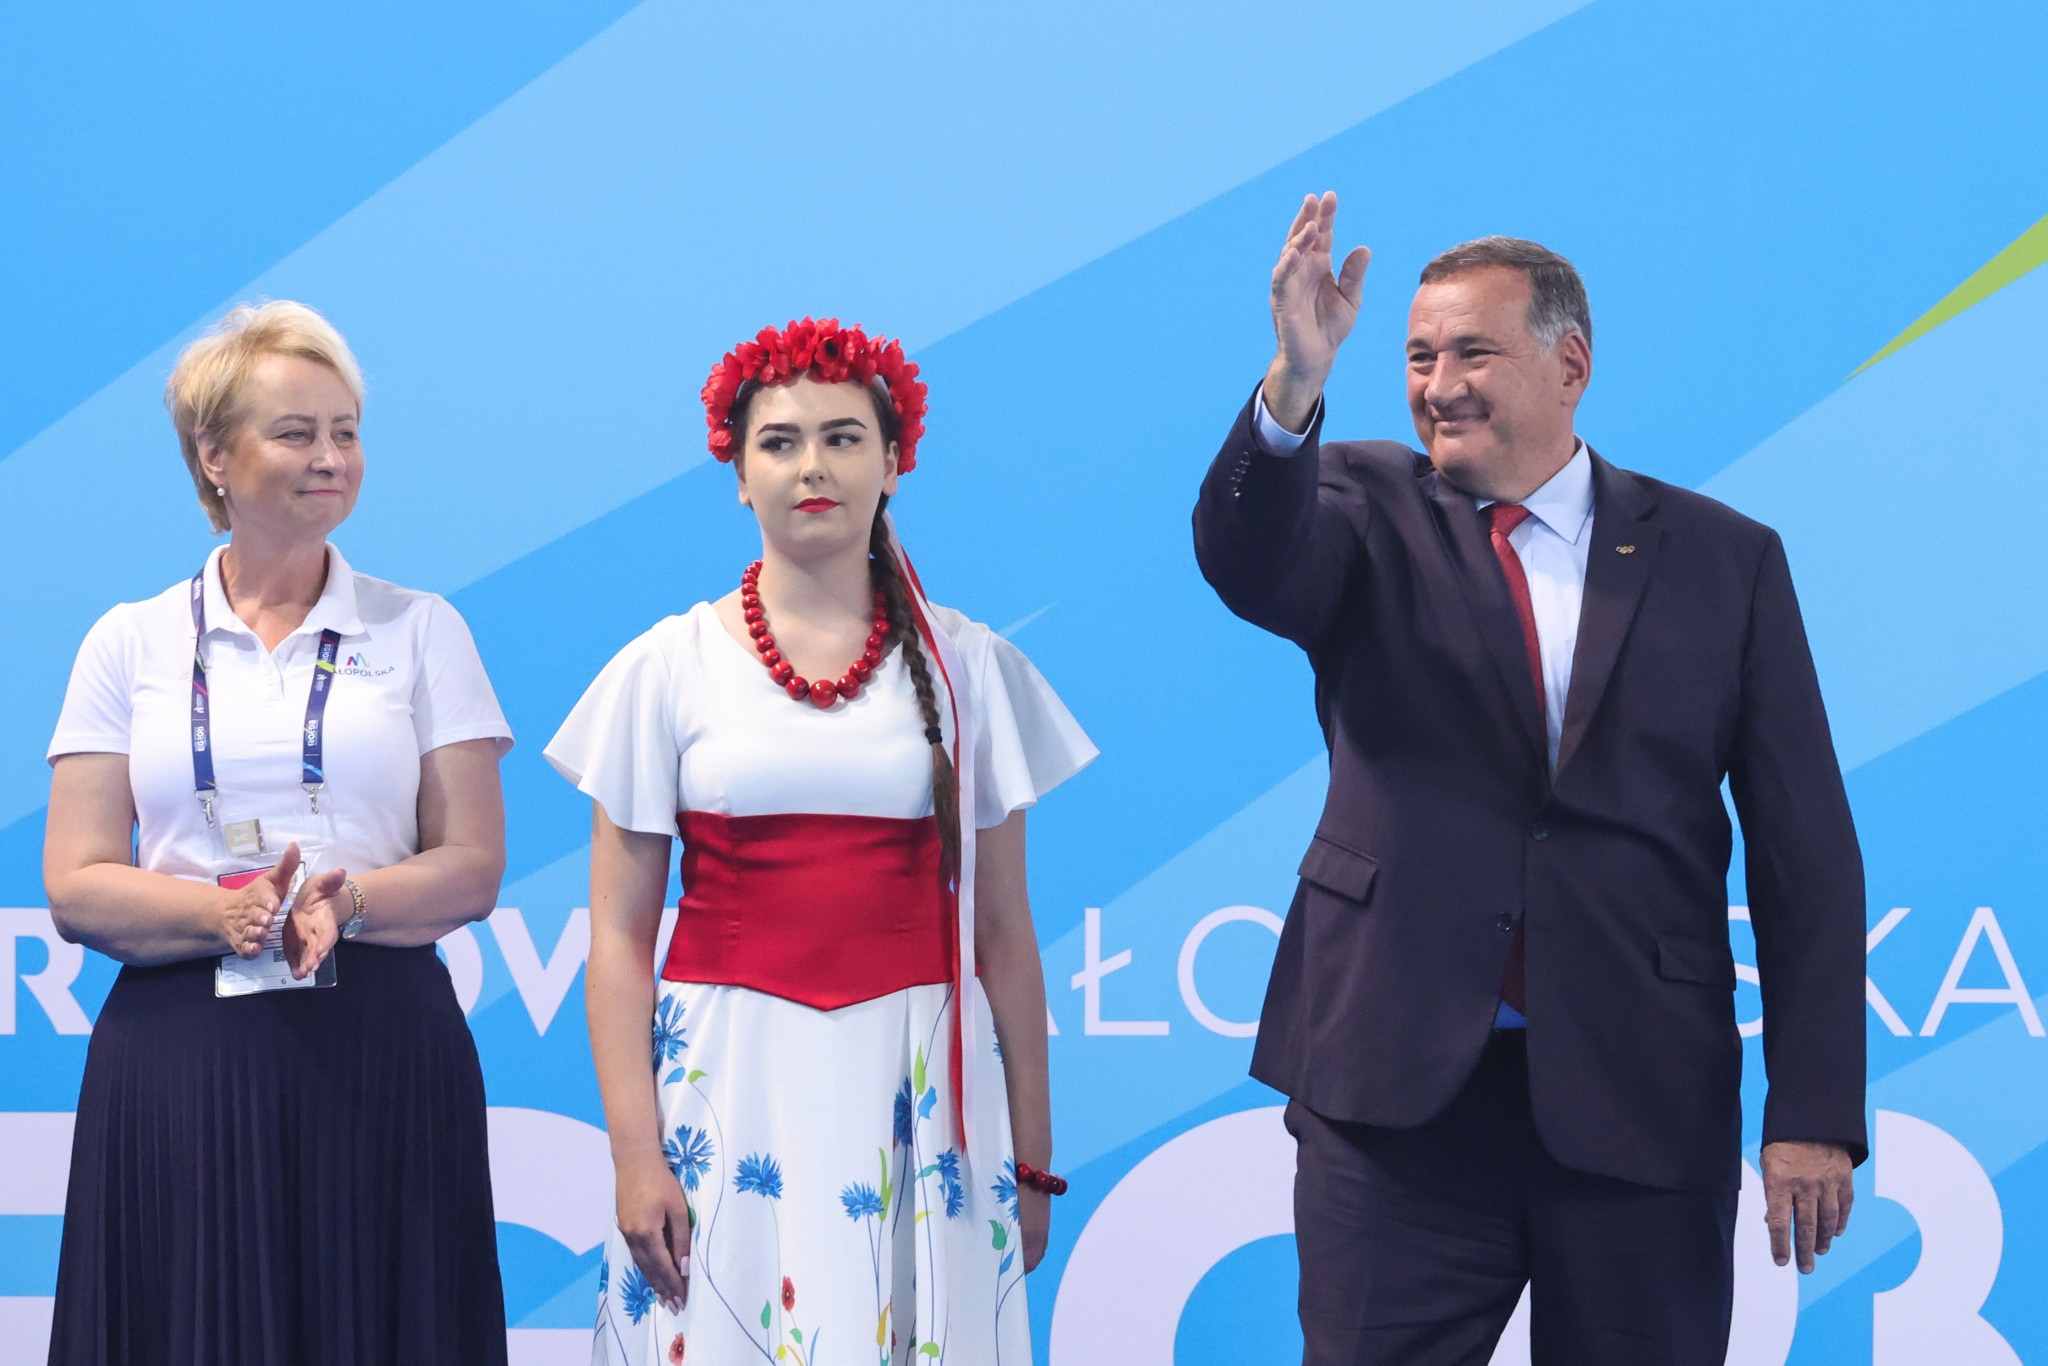 EOC President Spyros Capralos, right, presented the medals during the ceremony for the first medal event at the Games ©Kraków-Małopolska 2023